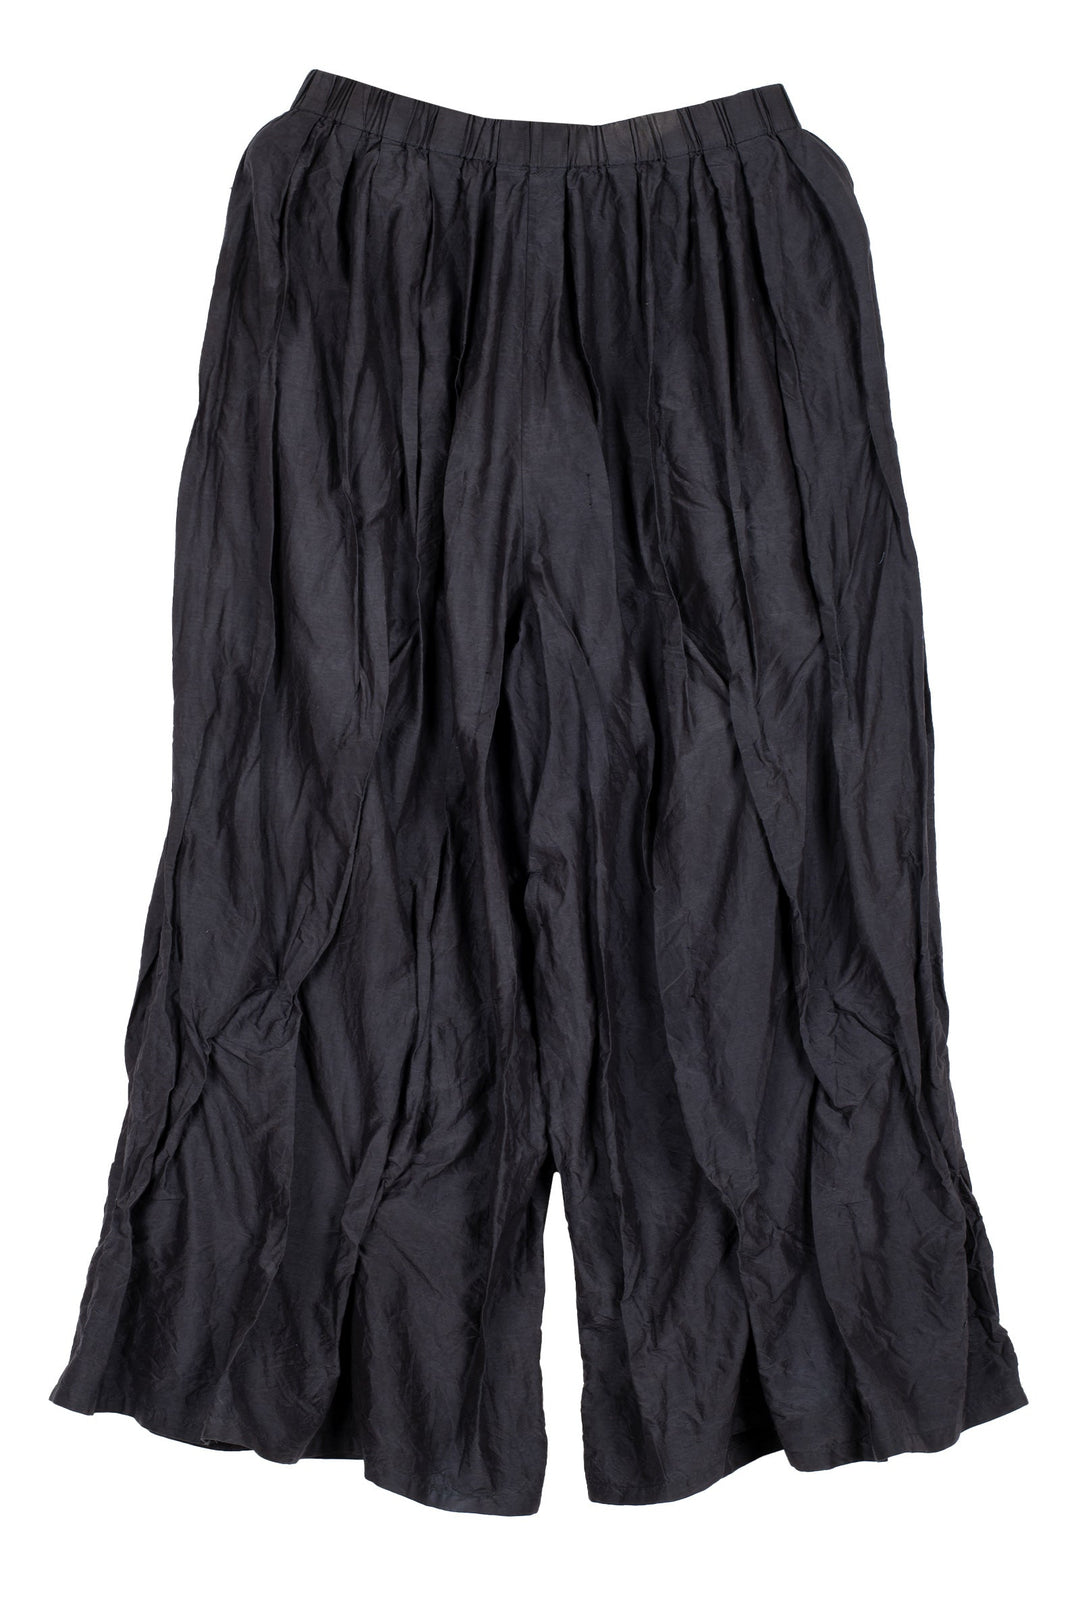 DYED COTTON SILK HEAVY VOILE WAVY TUCKED PANTS - dh1635-blk -